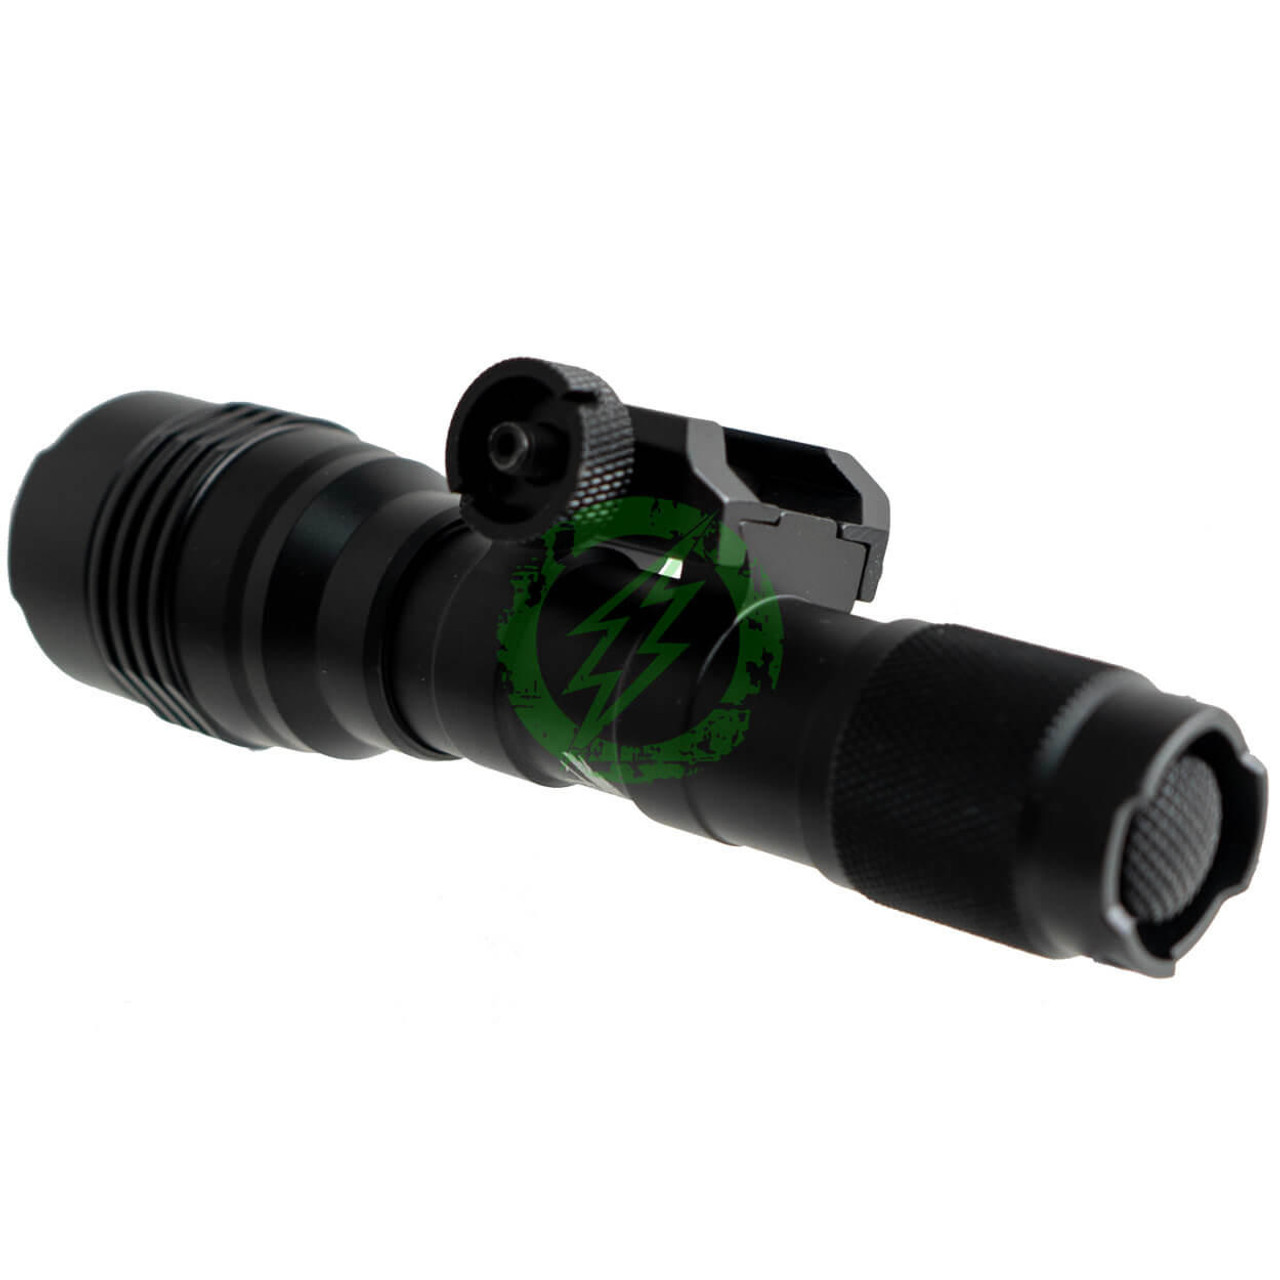  High Power Airsoft Tactical Rifle Light with Pressure | 1000 Lumens 